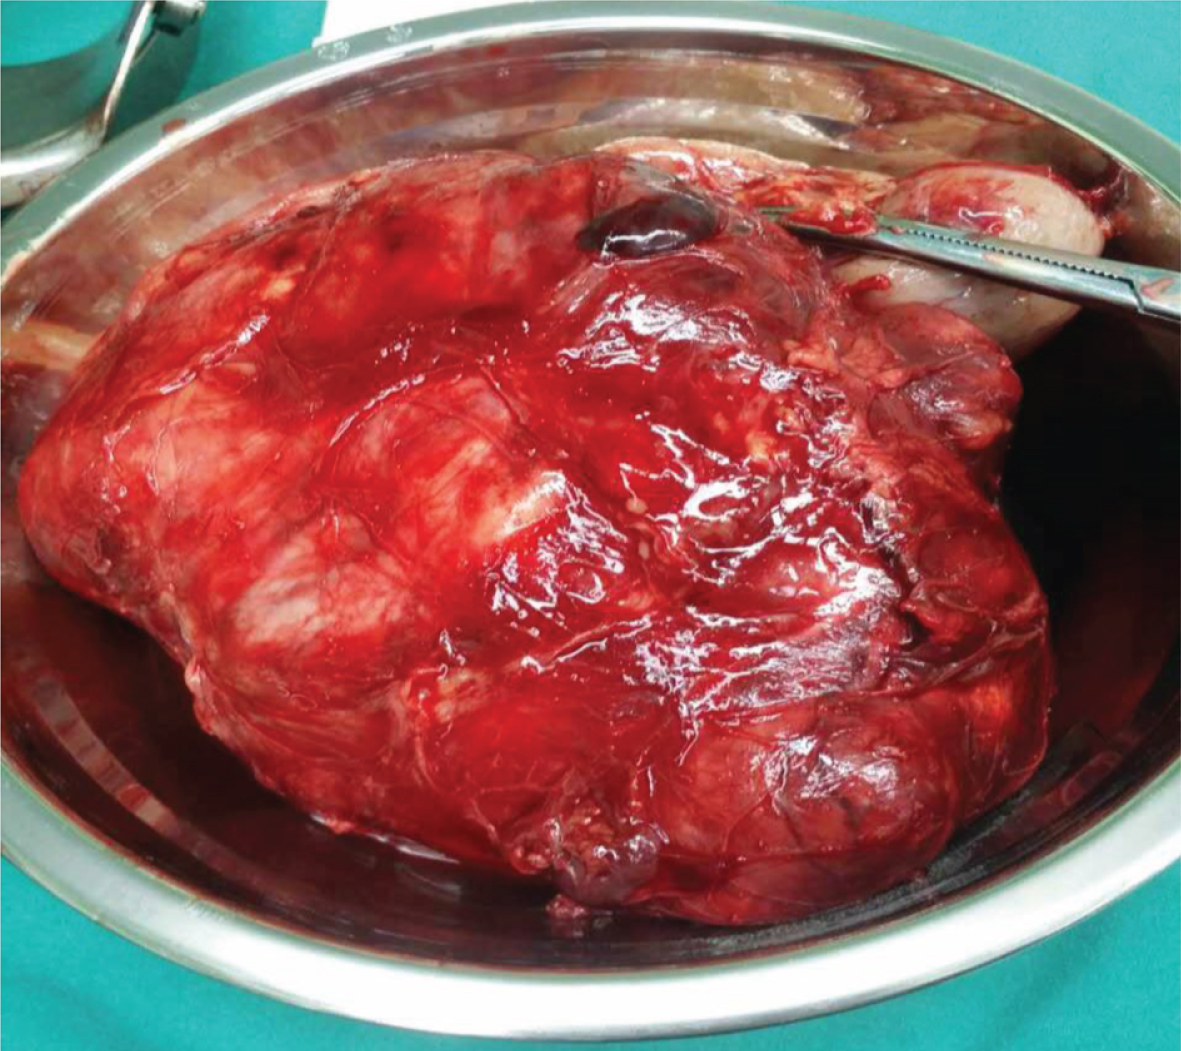 Gross view of completely-resected adrenal carcinoma. The tumor was entirely covered by the capsular and minimal tissue adhesion and the tumor size was 6.8 cm ×5.2 cm.